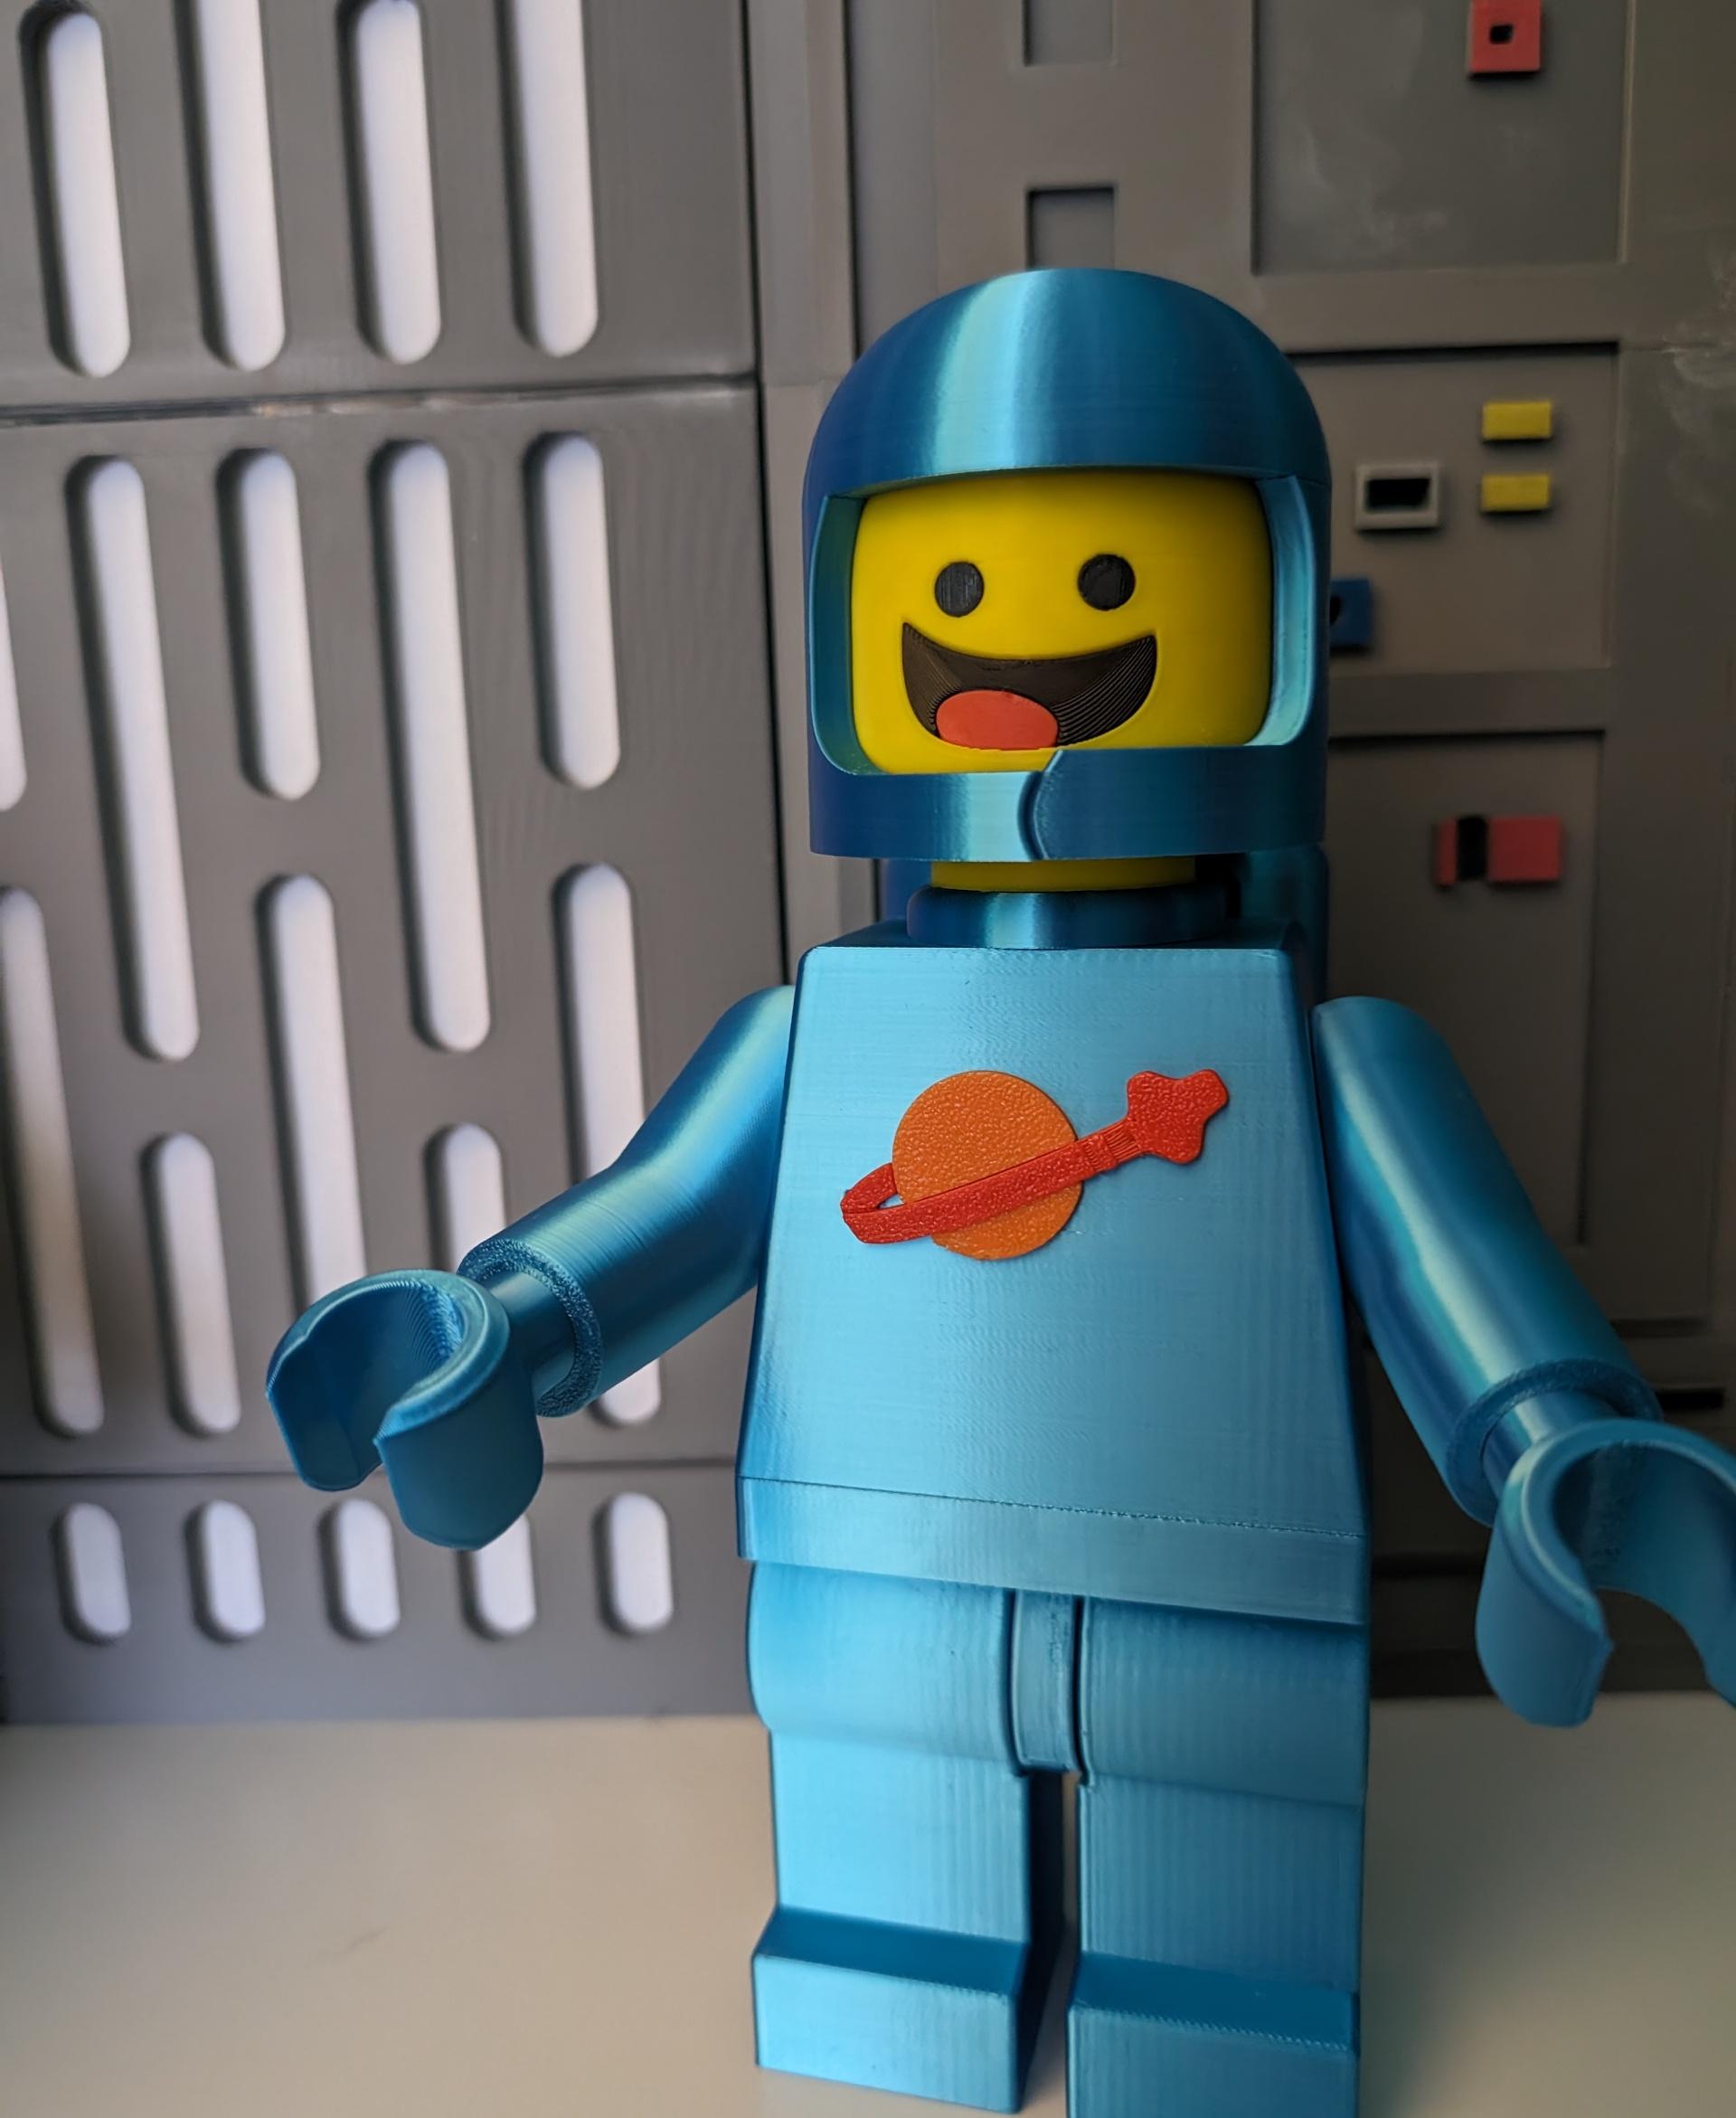 Benny's Head and Helmet (6:1 LEGO-inspired brick figure, NO MMU/AMS, NO supports, NO glue) - What a happy chap! - 3d model